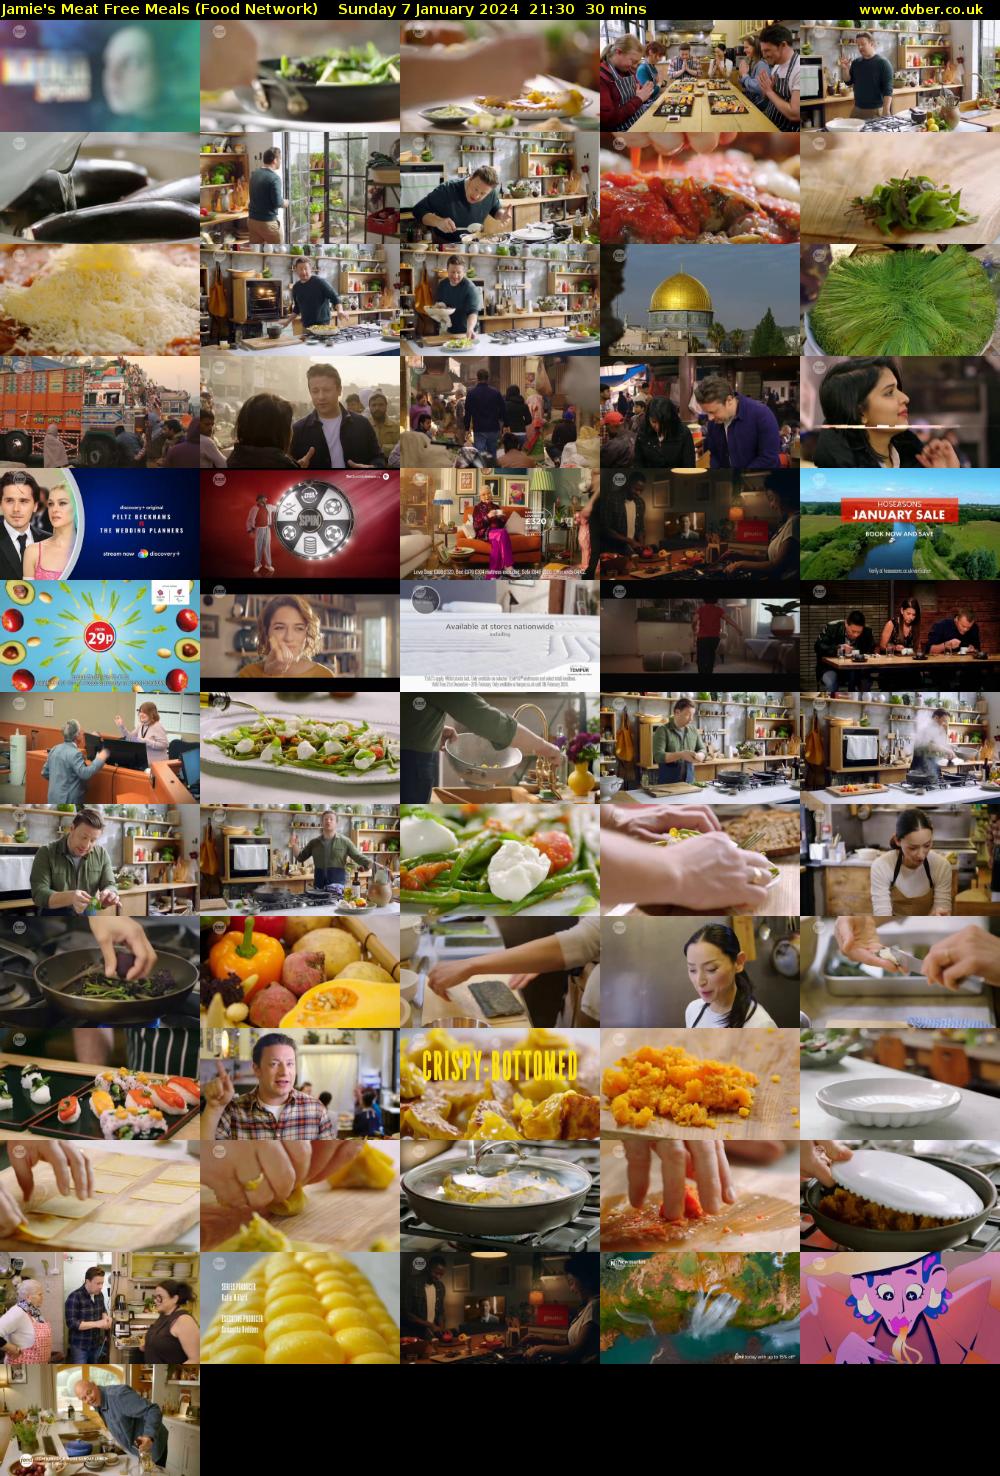 Jamie's Meat Free Meals (Food Network) Sunday 7 January 2024 21:30 - 22:00